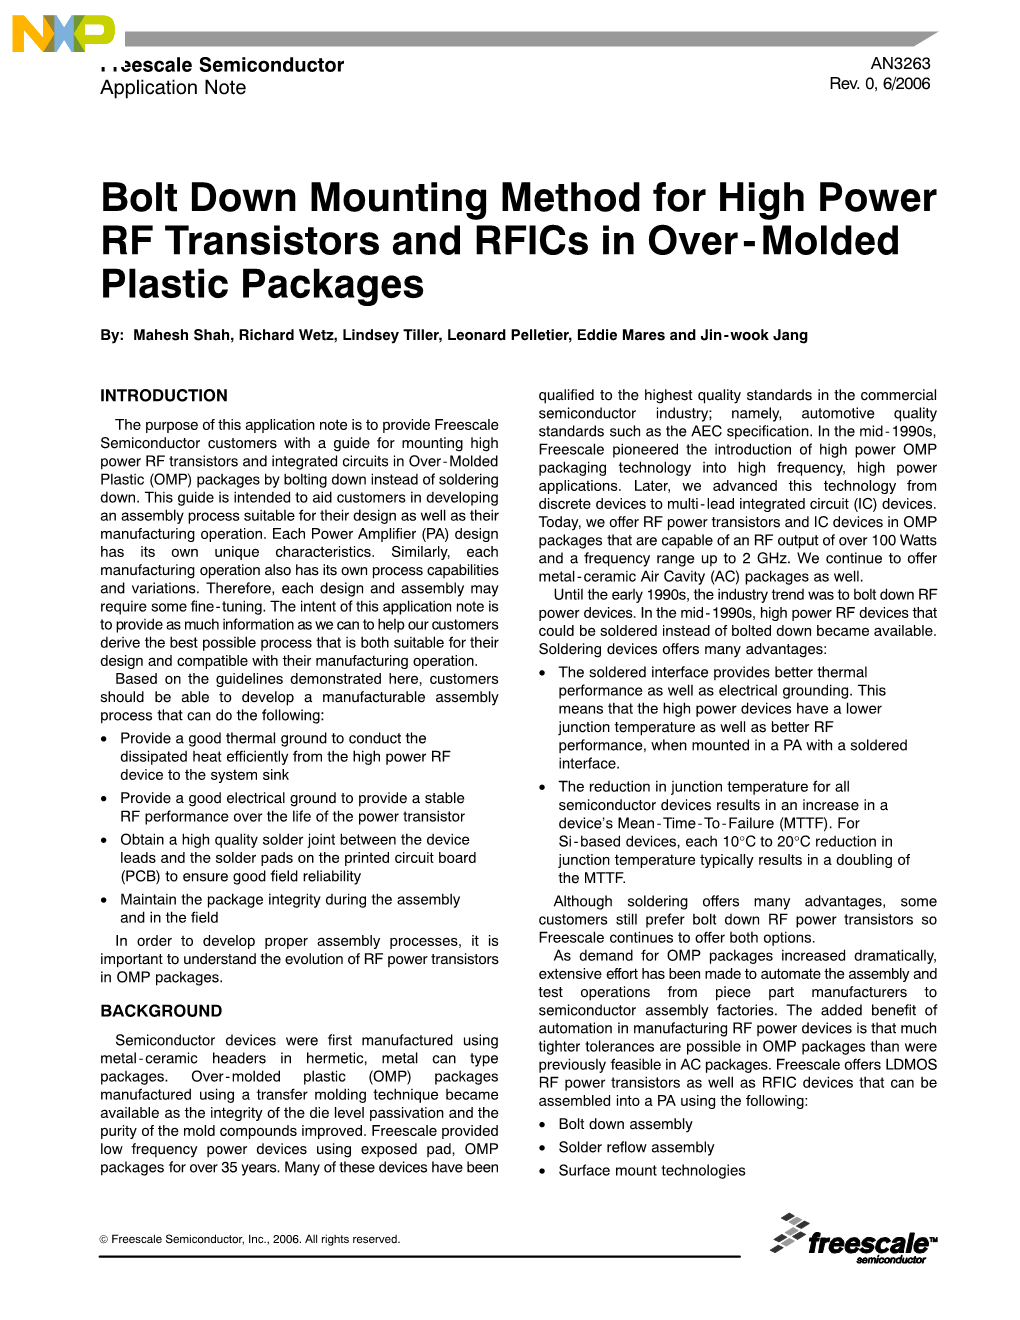 Bolt Down Mounting Method for High Power RF Transistors and Rfics in Over-Molded Plastic Packages